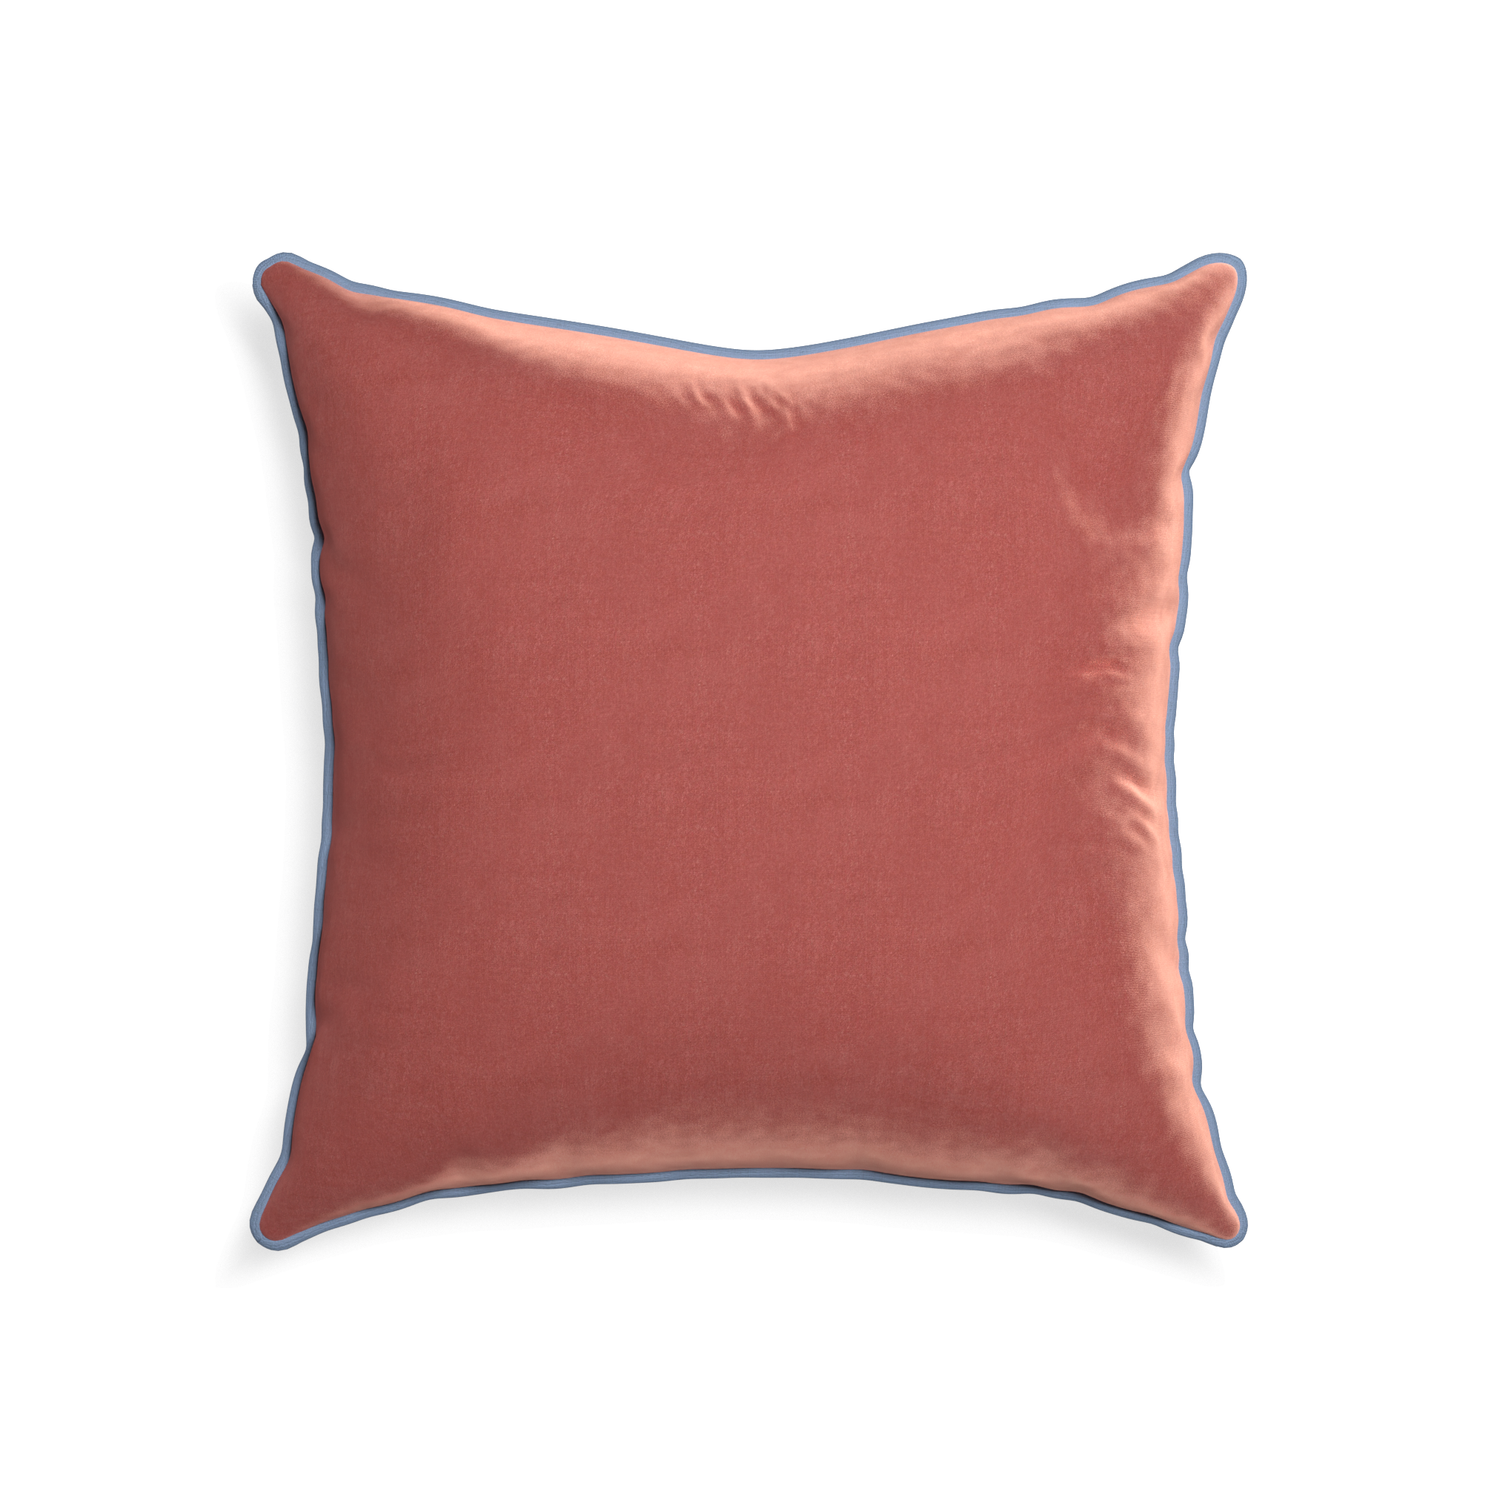 22-square cosmo velvet custom coralpillow with sky piping on white background